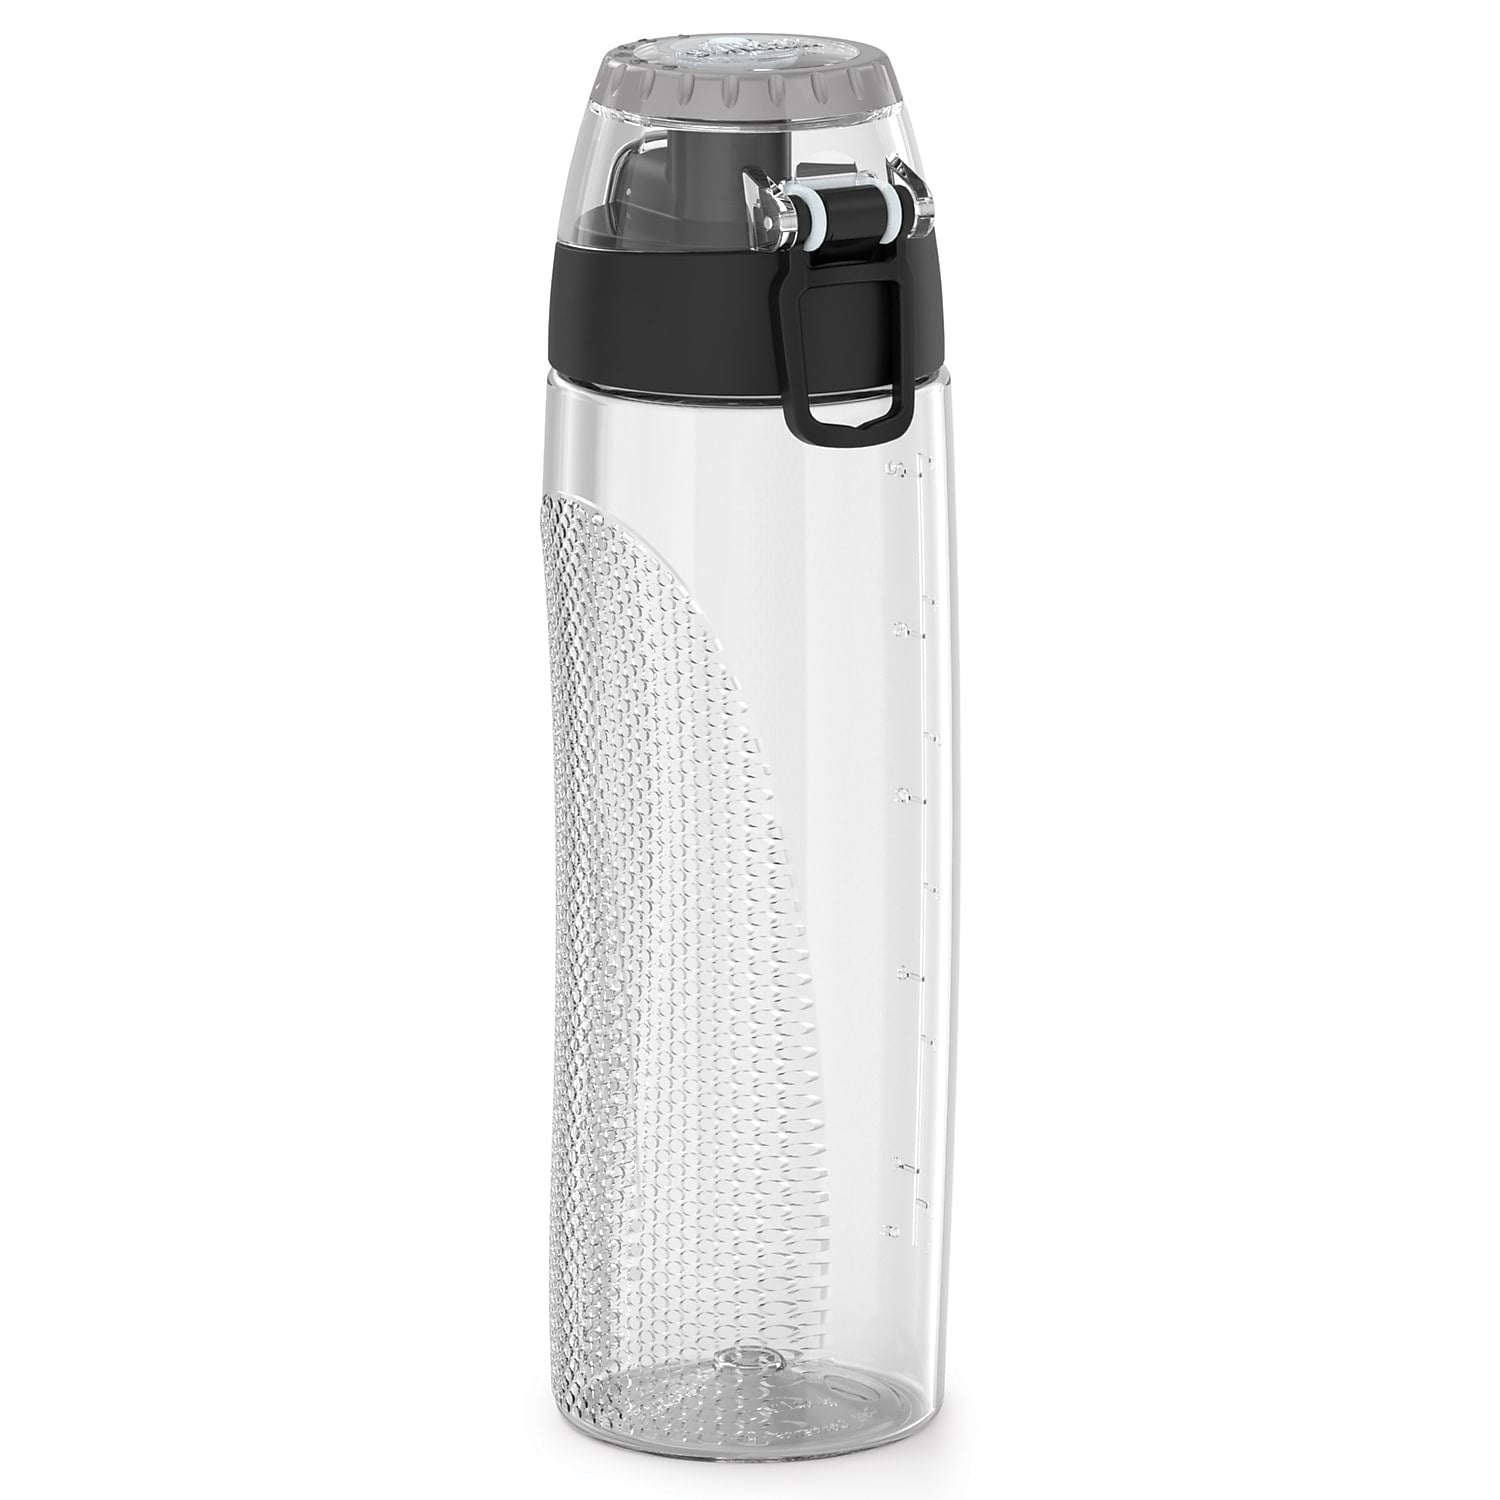 HoneyBee Thermos for Hot Drinks Keeps Liquid Hot or Cold for Up to 24 Hours  Thermos 41 Ounce Coffee Thermos 18/8 Stainless Steel Bpa-Free Insulated